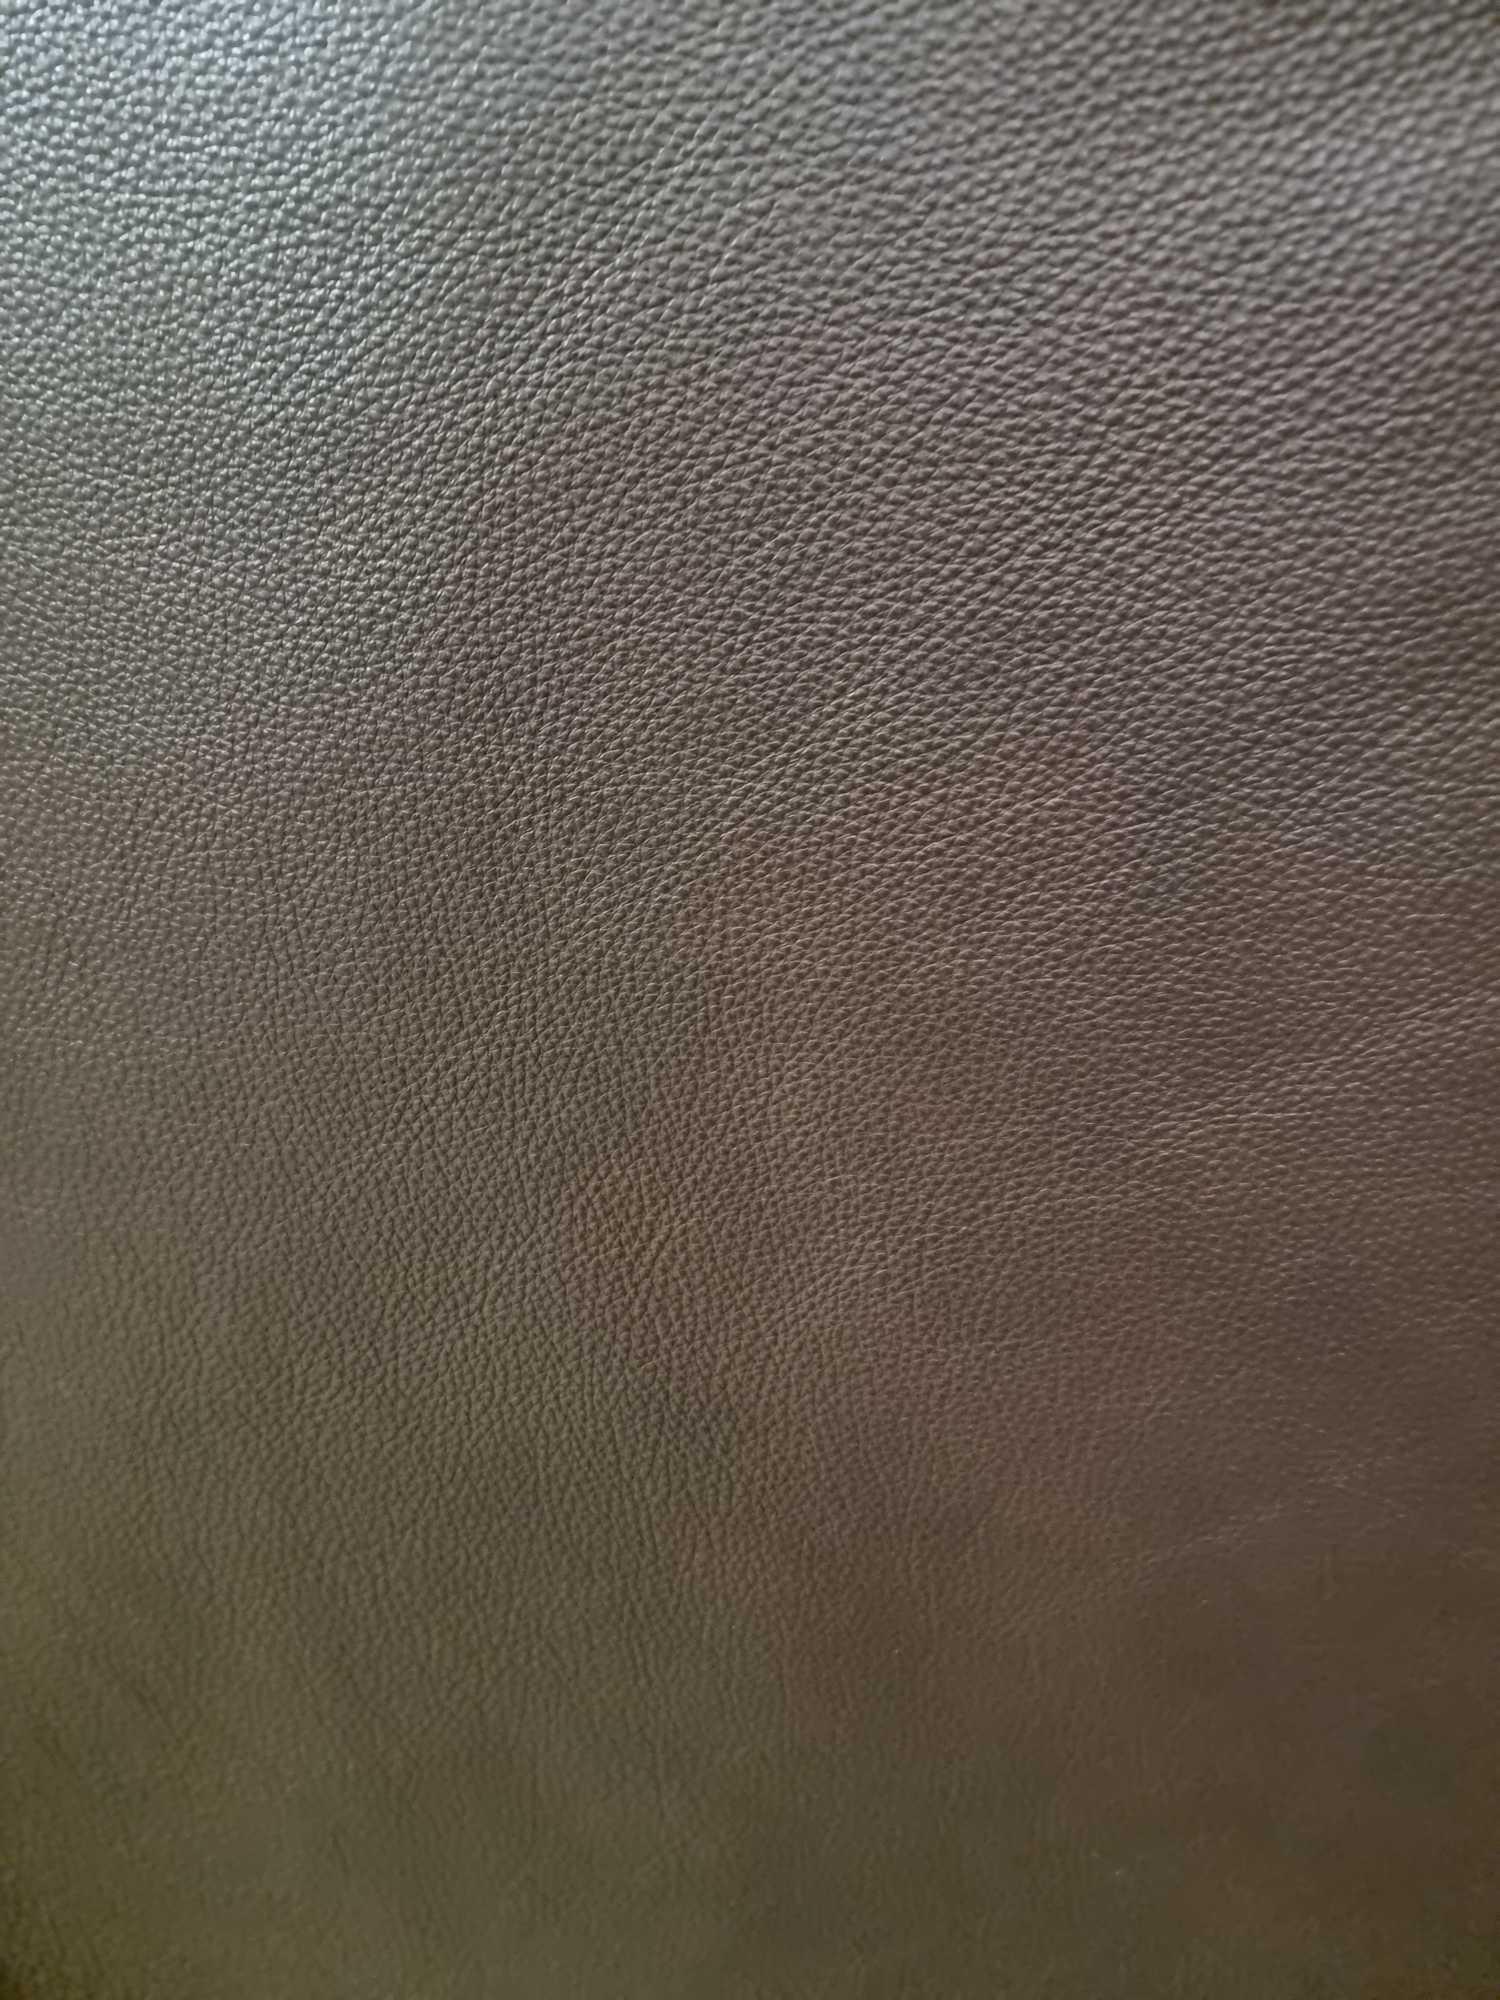 Mastrotto Hudson Chocolate Leather Hide approximately 2mÂ² 2.5 x 0.8cm - Image 2 of 2